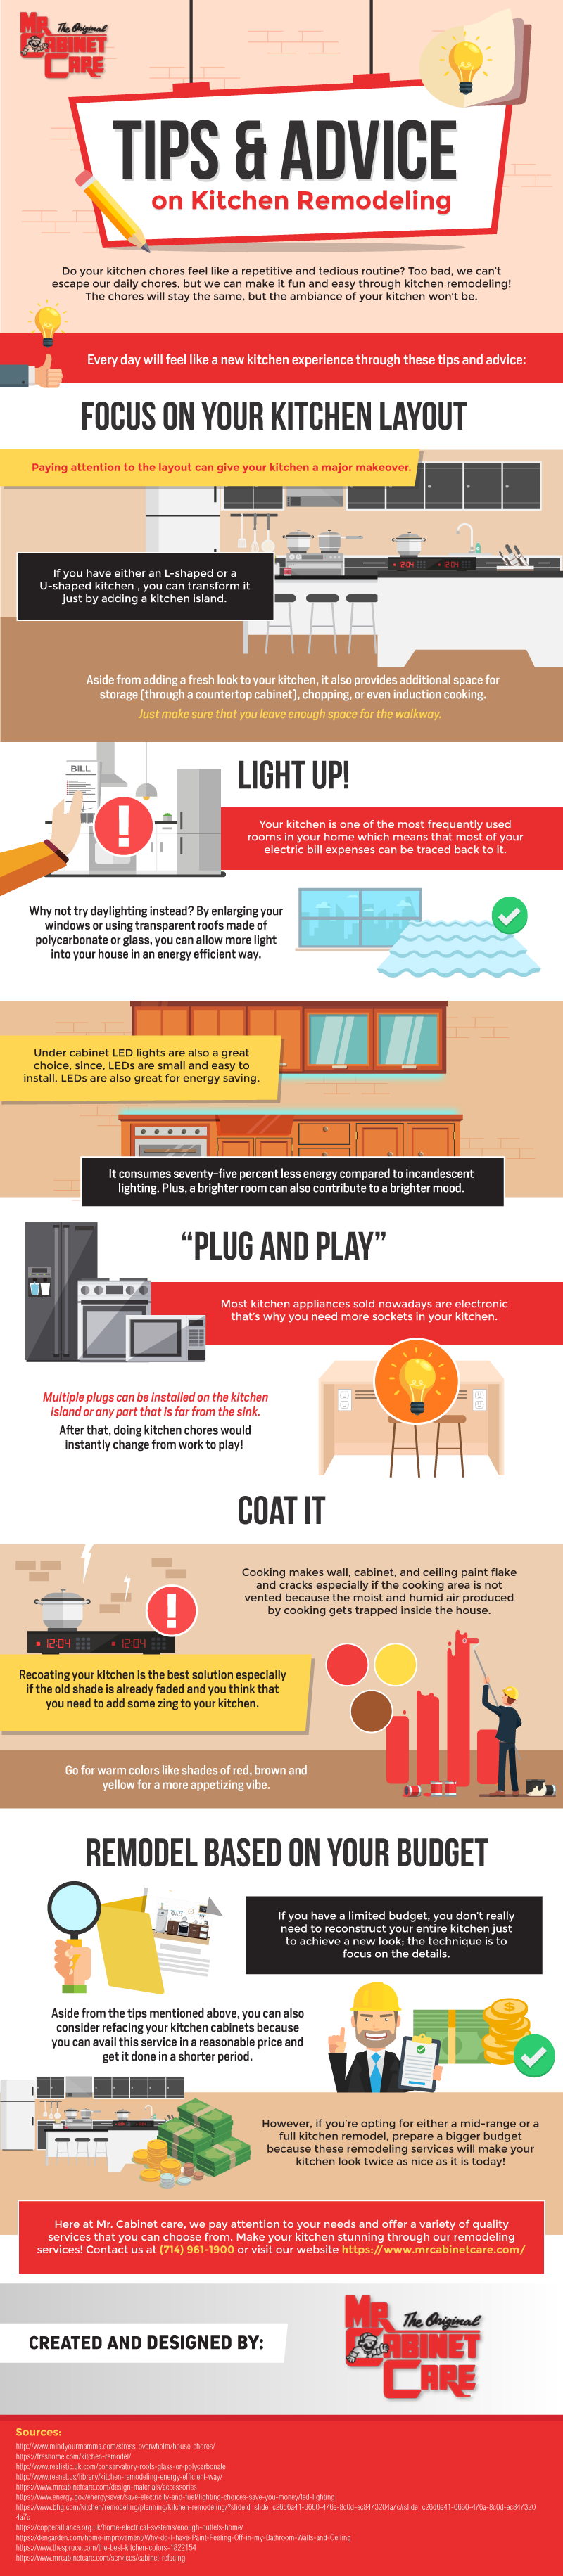 Tips and Advice on Kitchen Remodeling (Infographic)